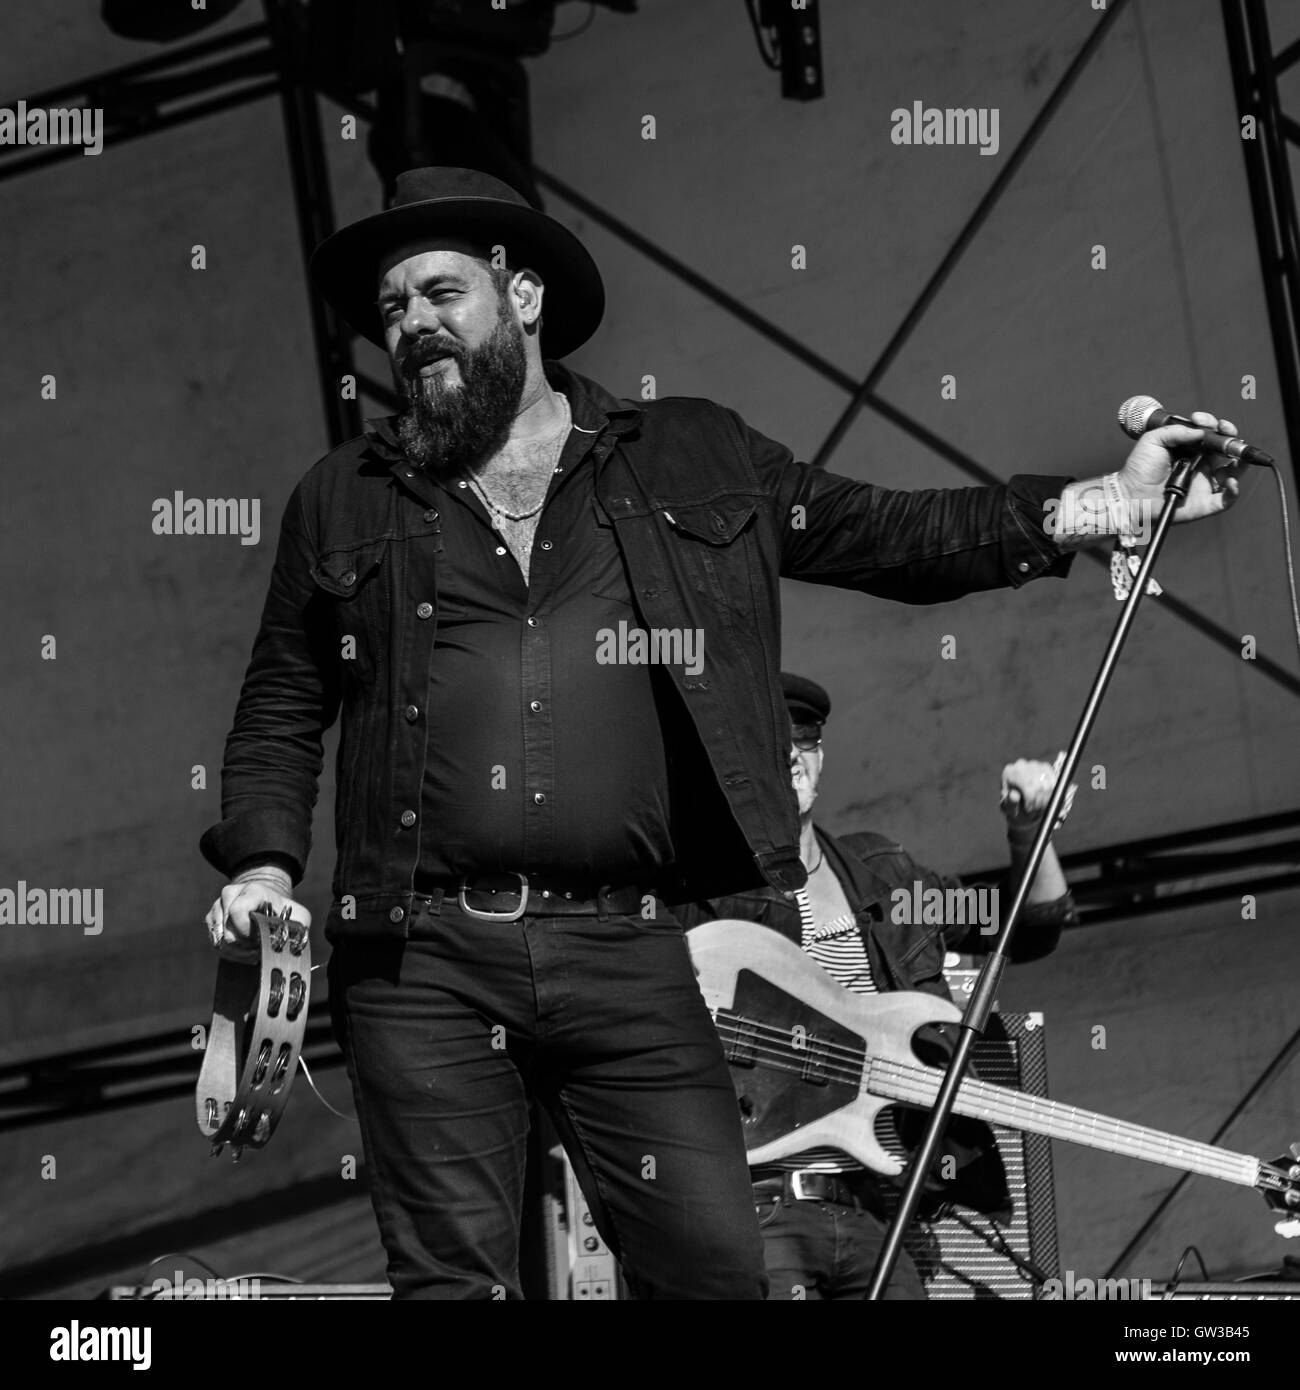 Nathaniel Rateliff and the NIght Sweats at Citadel festival London 2016 Stock Photo